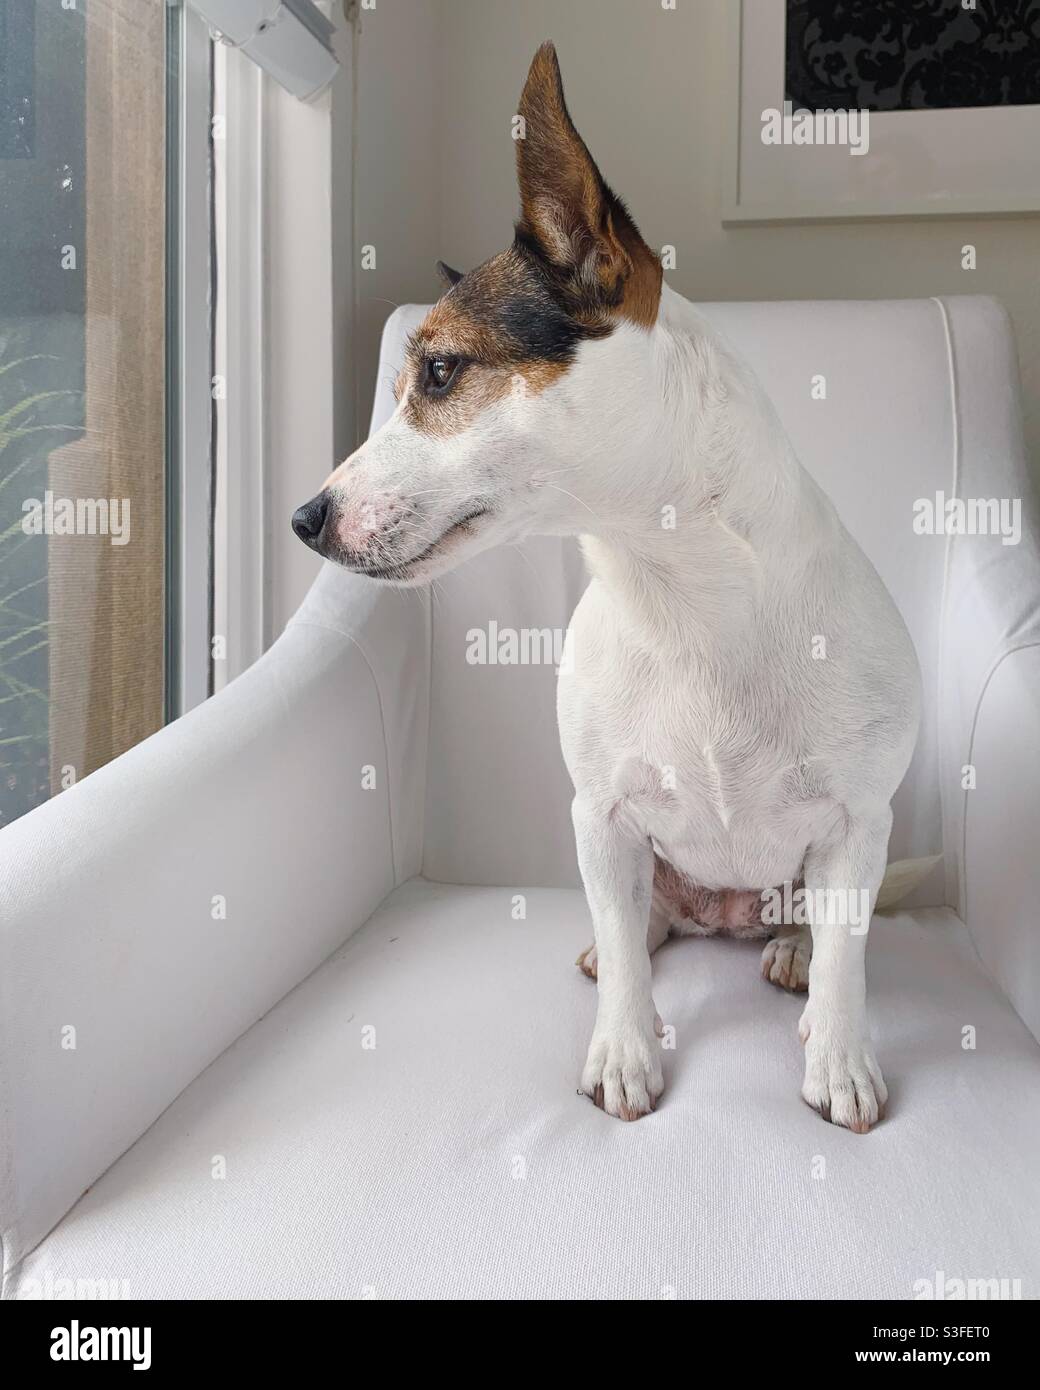 Jack Russell Terrier dog looking out a window while sitting on a white chair. Stock Photo